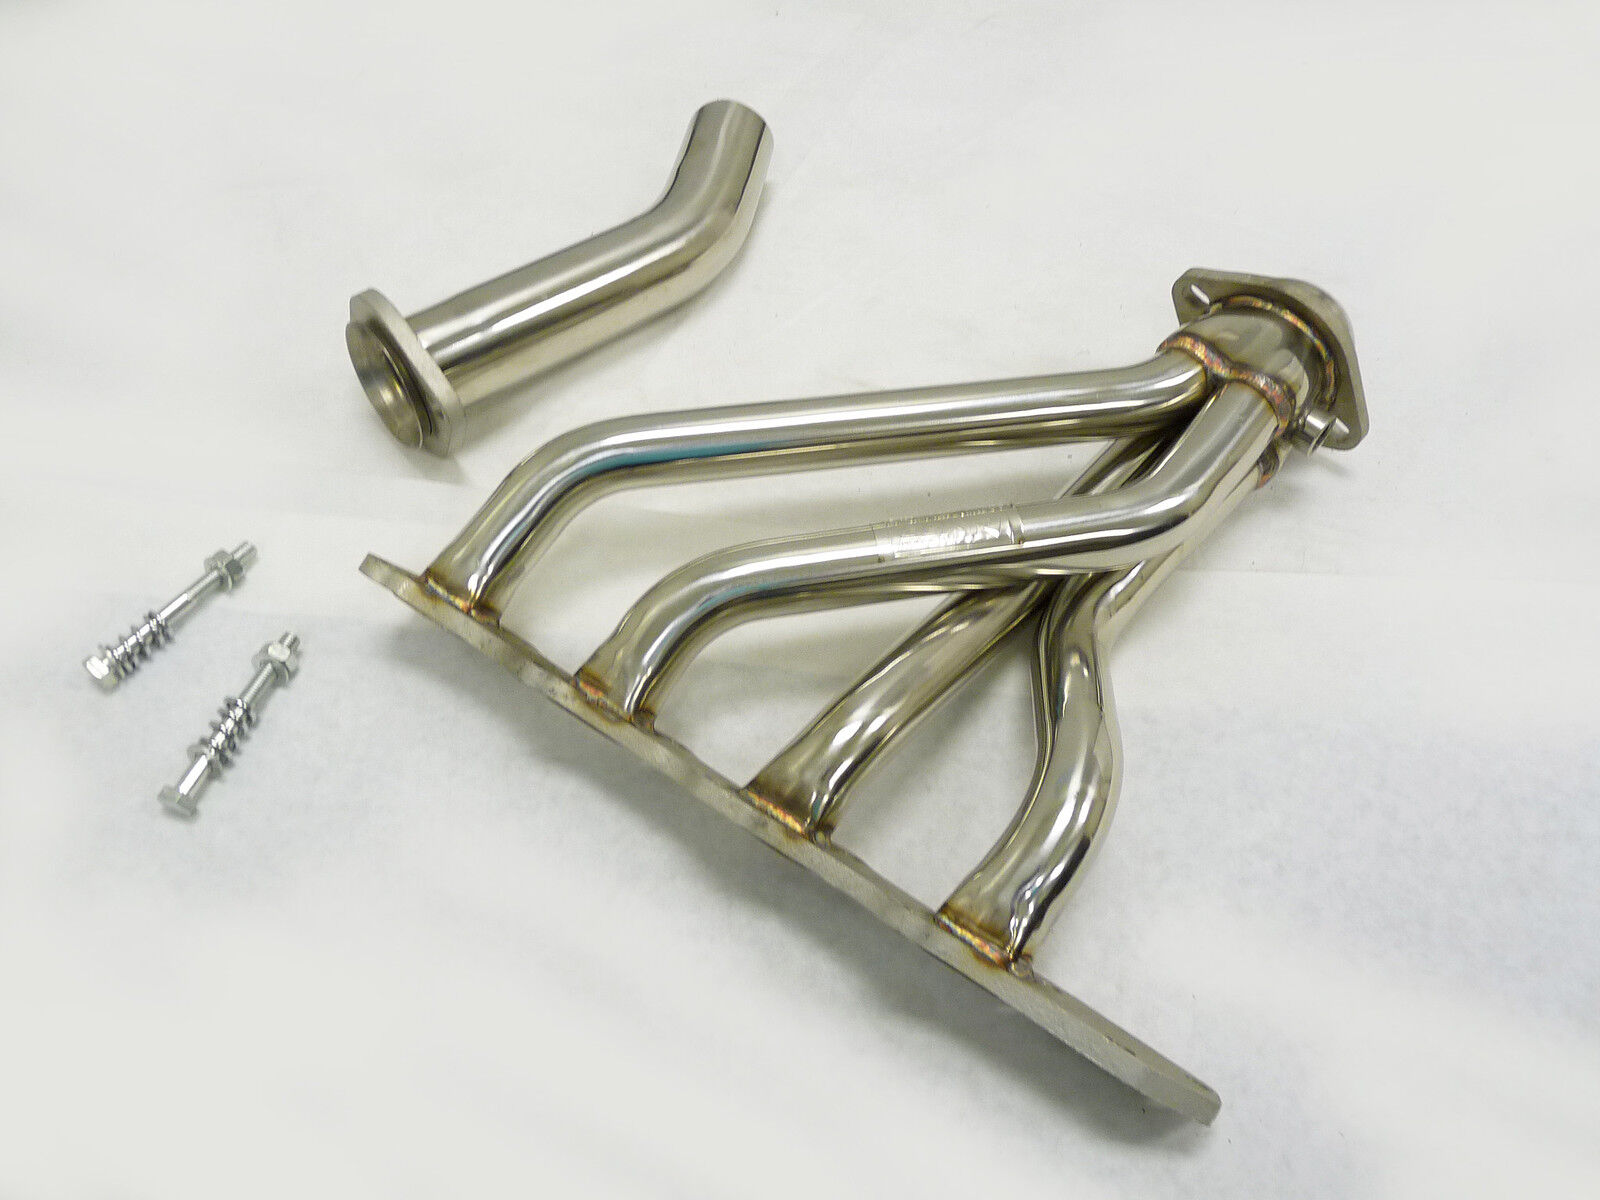 OBX-RS Stainless Header Fits For 1998-2001 Cavalier Z24/ Pontiac Sunfire 2.4L